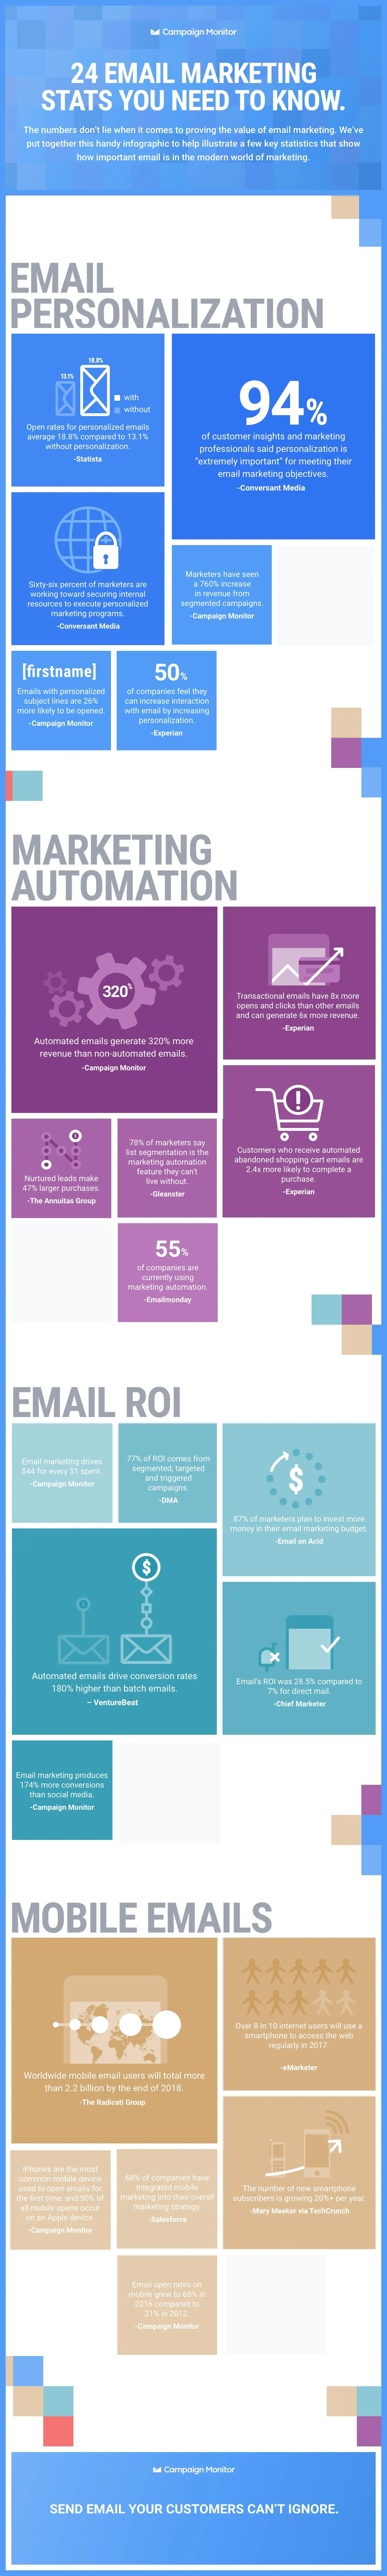 24 Email Marketing Stats You Need to Know - #infographic